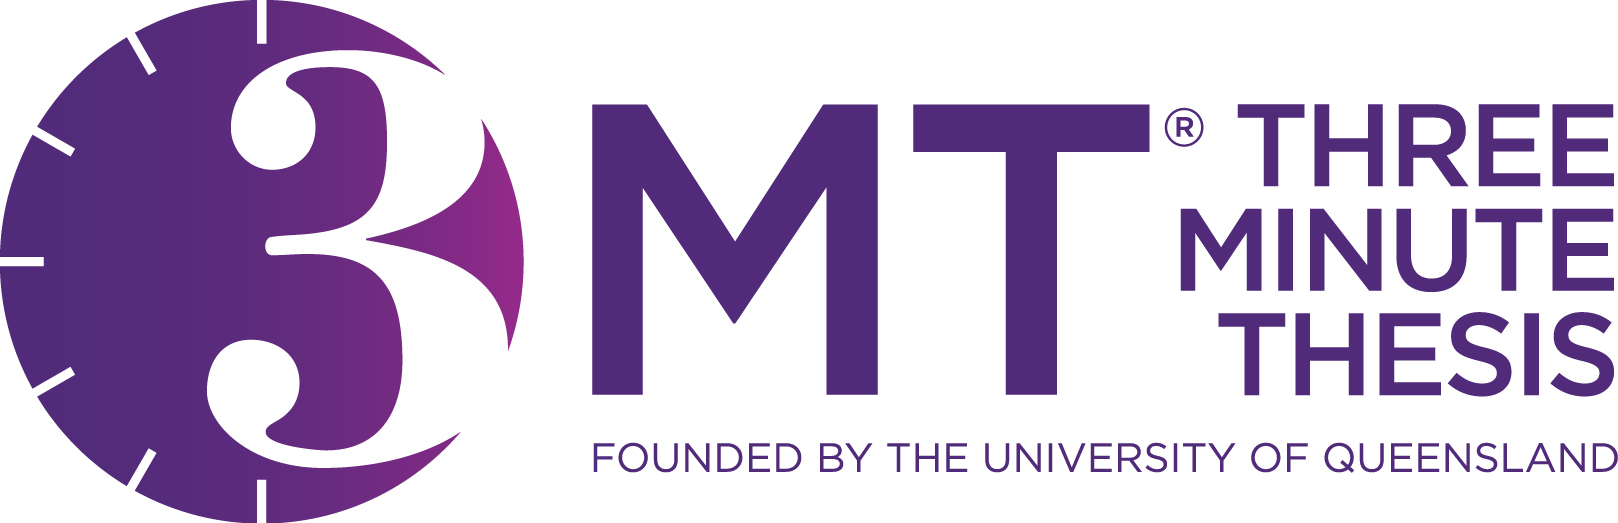 Three Minute Thesis Competition - University of Queensland